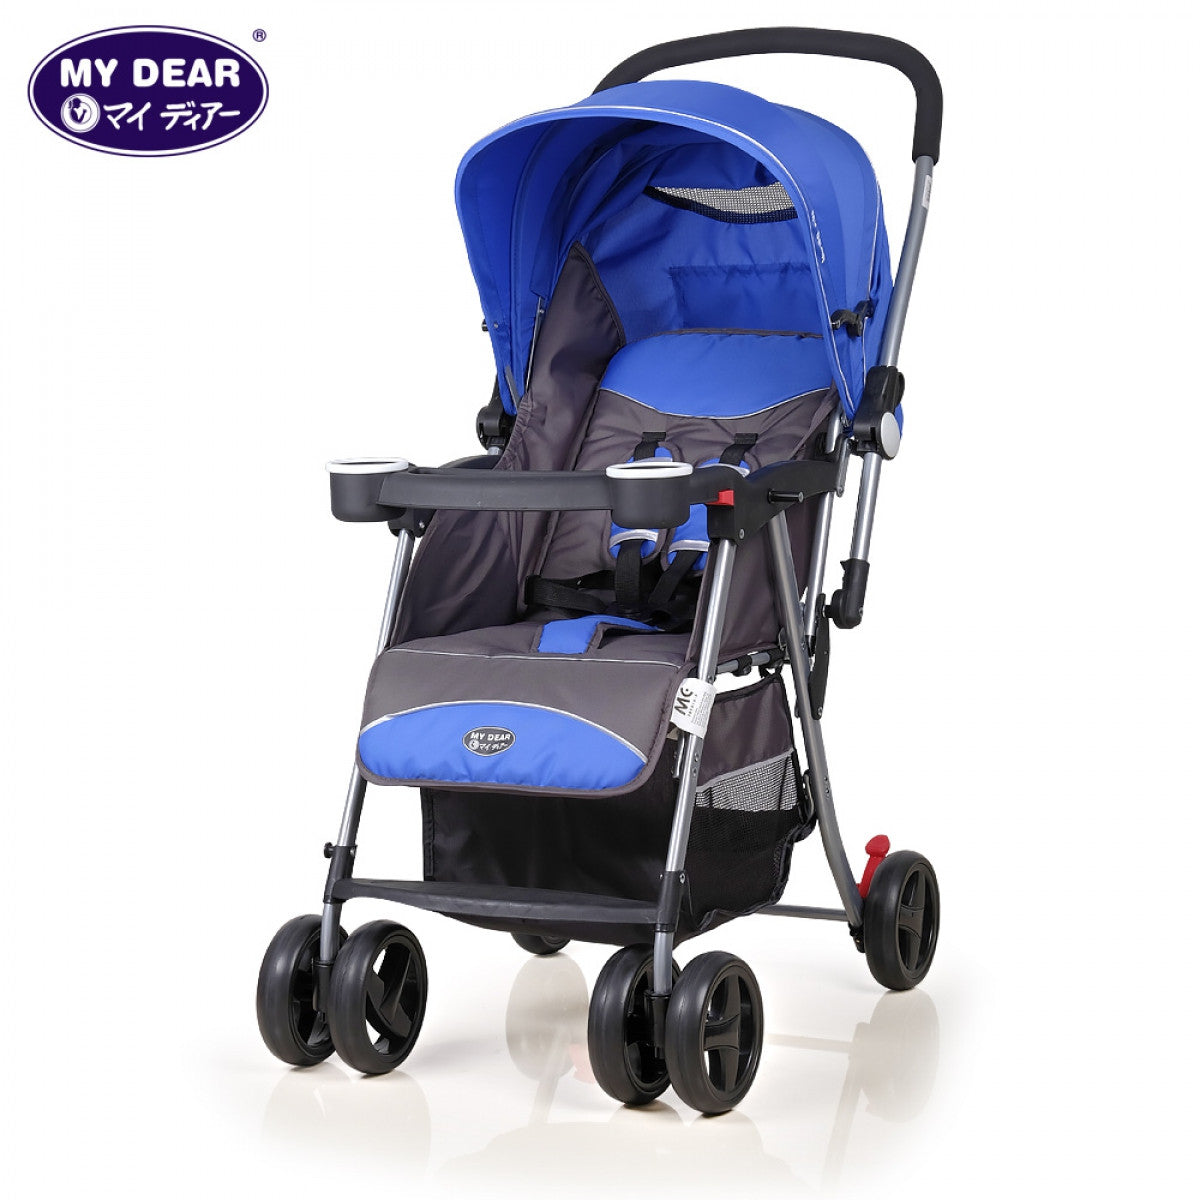 My Dear Lightweight Baby Stroller 18018 With Free Detachable Cup Holder